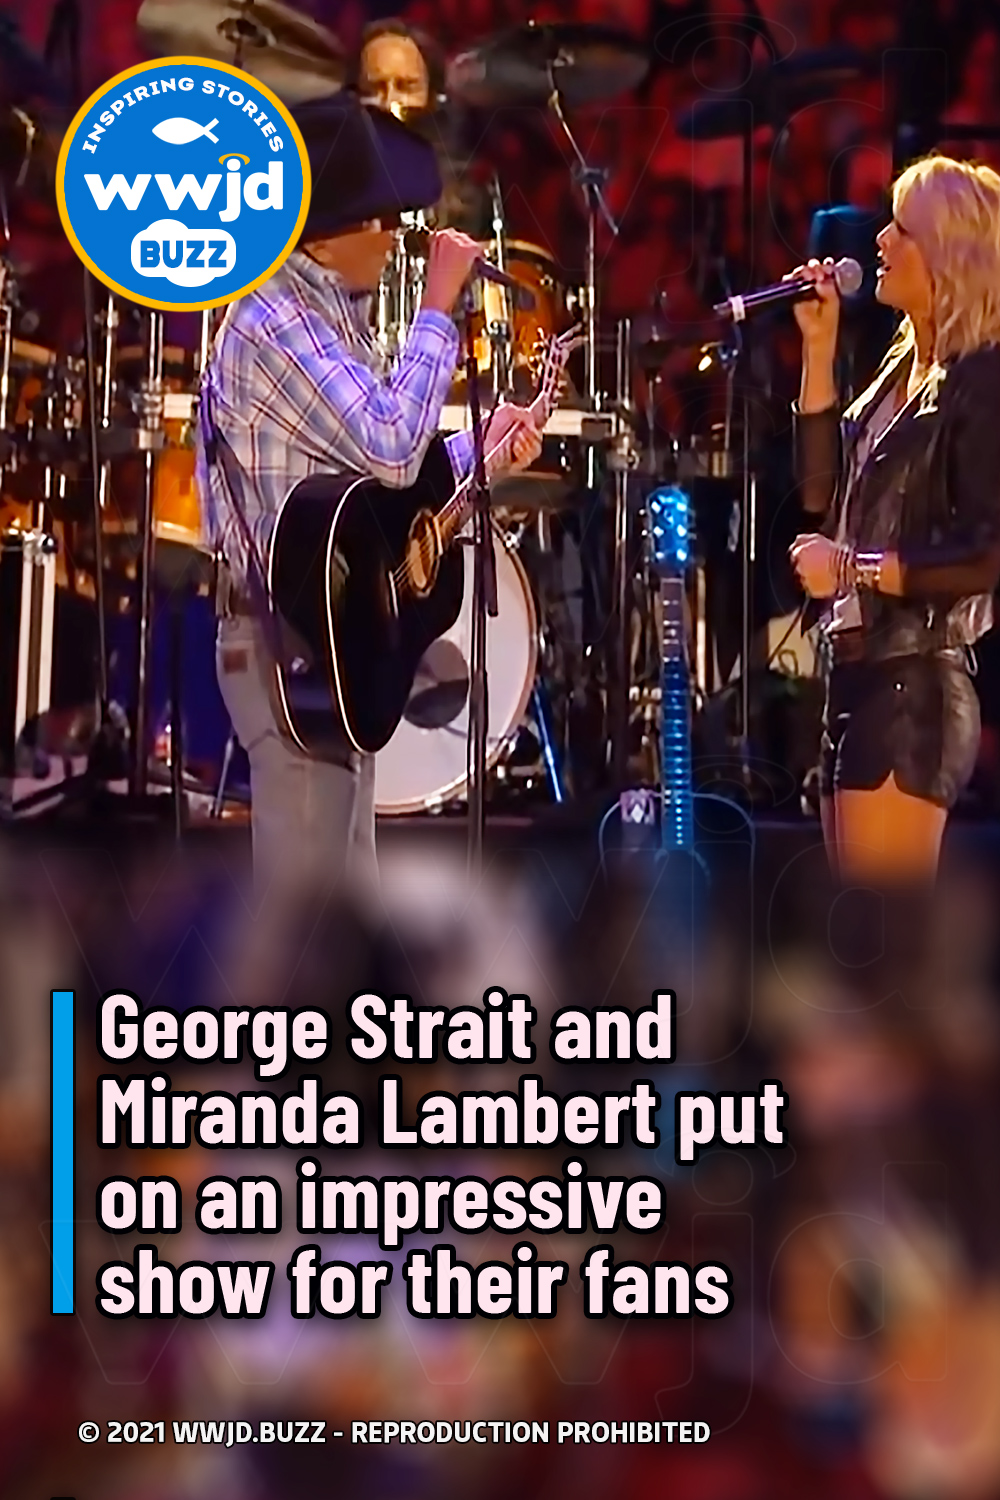 George Strait and Miranda Lambert put on an impressive show for their fans